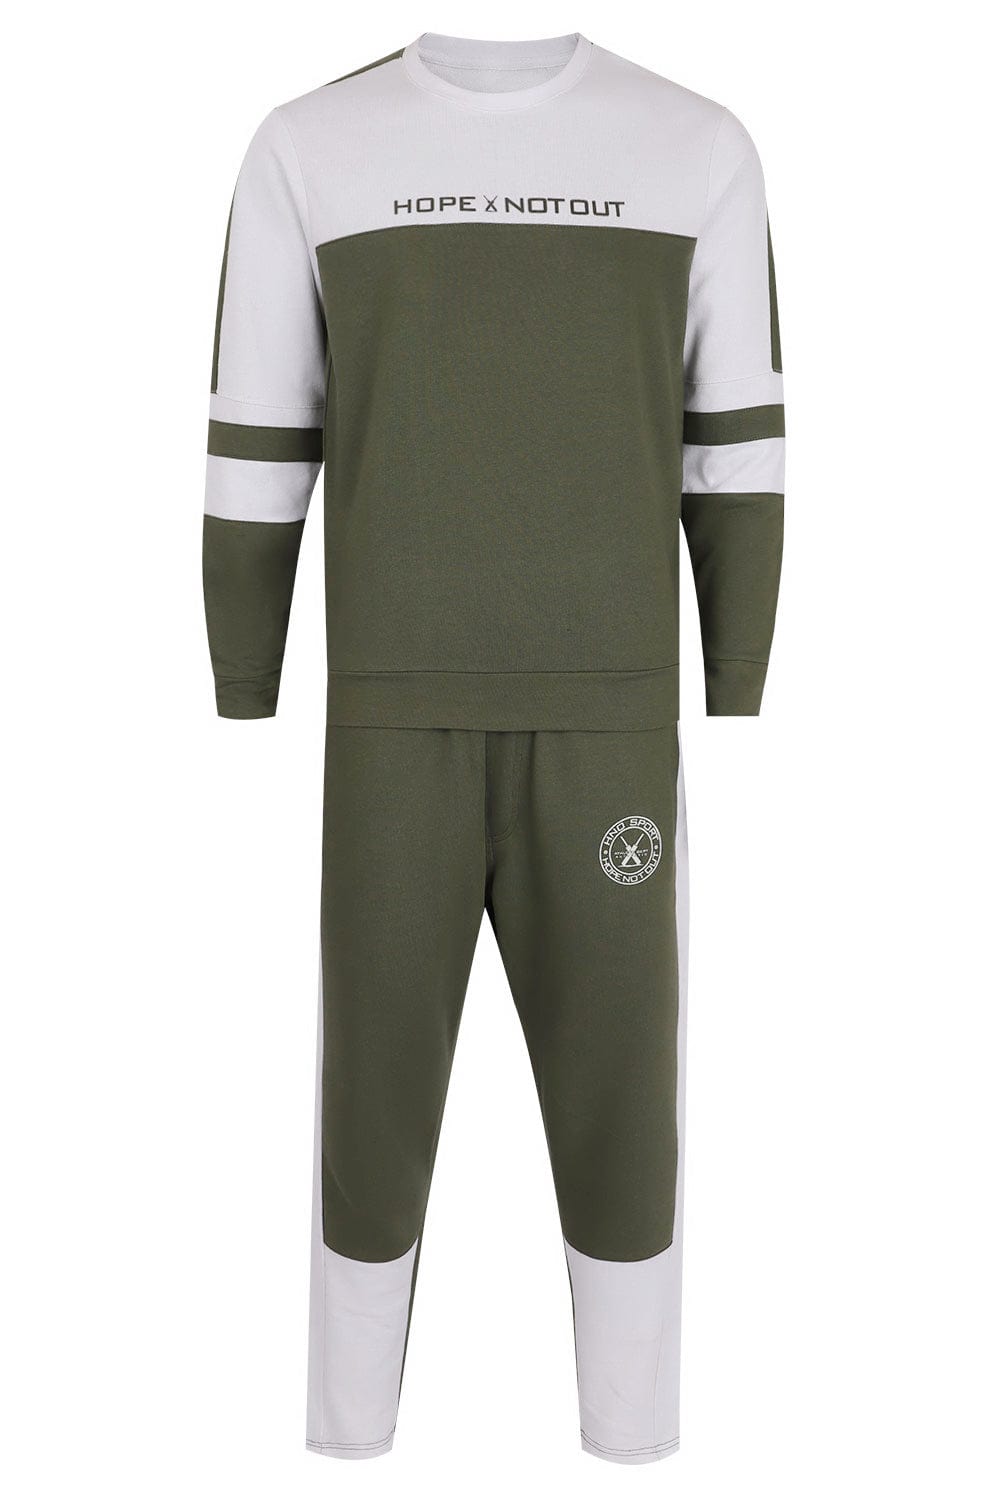 Hope Not Out by Shahid Afridi Men Athleisure Set Fashion Athleisure Set with Cut and Sew Panels